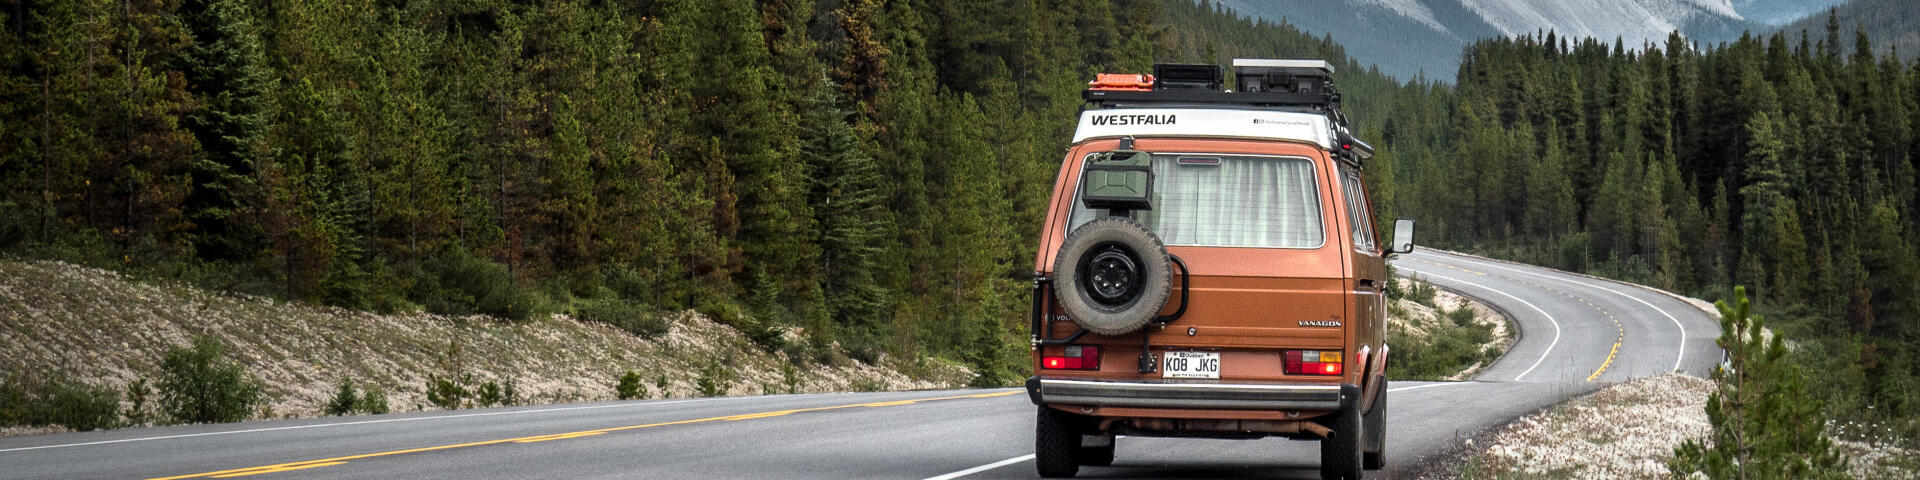 westfalia on the trans canadian highway in the rockies